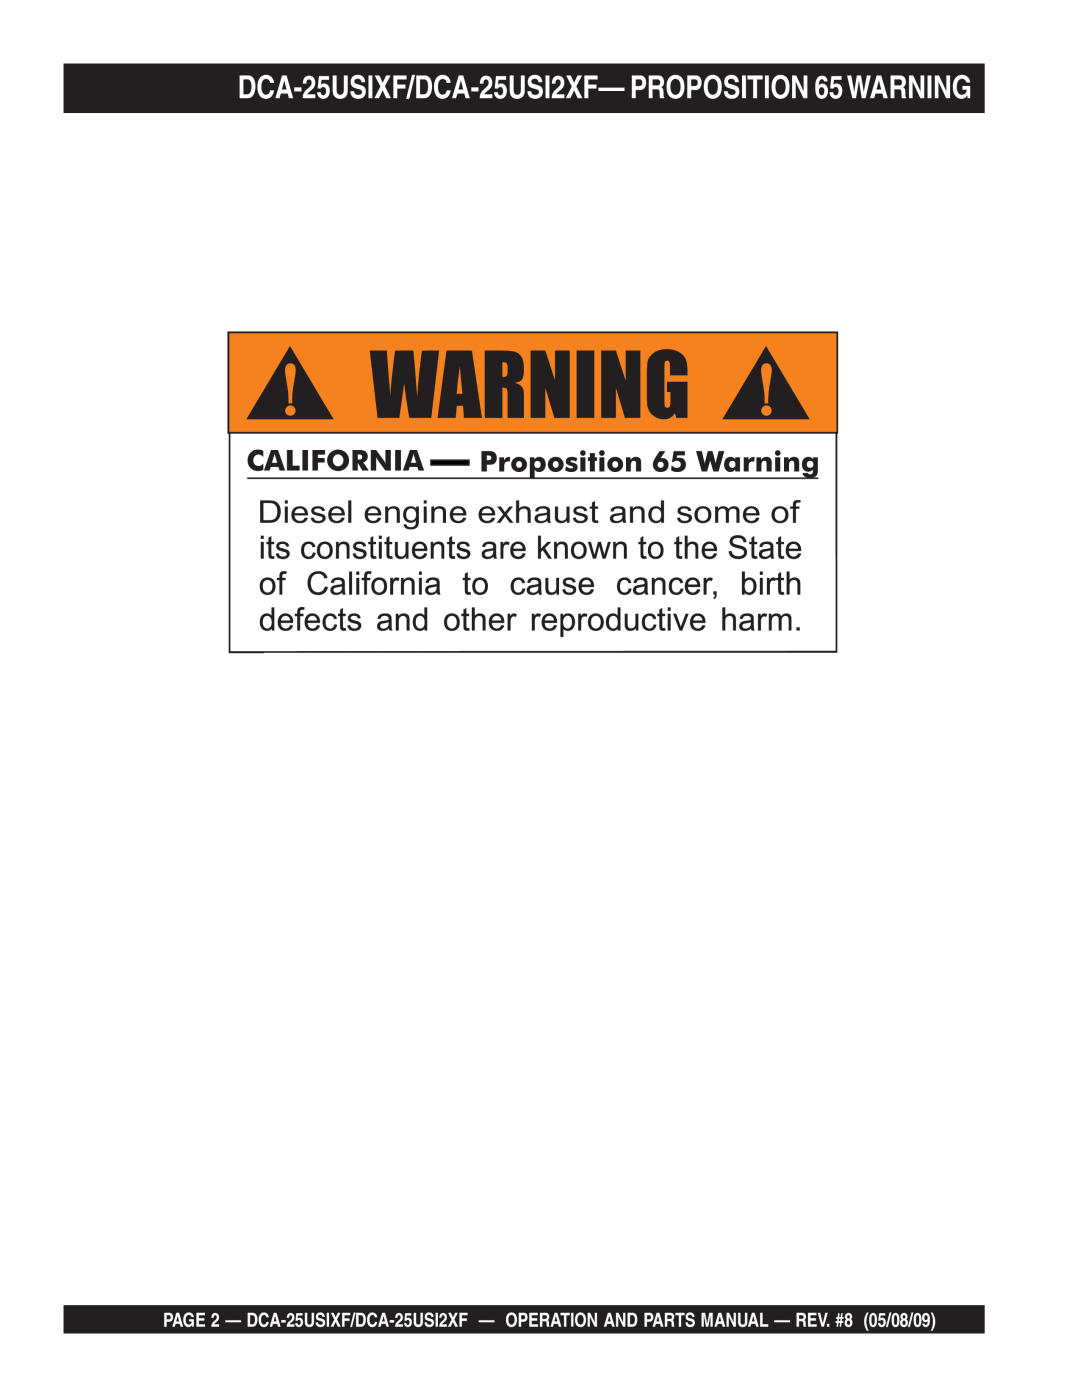 Multiquip operation manual DCA-25USIXF/DCA-25USI2XF- PROPOSITION 65WARNING, Diesel engine exhaust and some of 